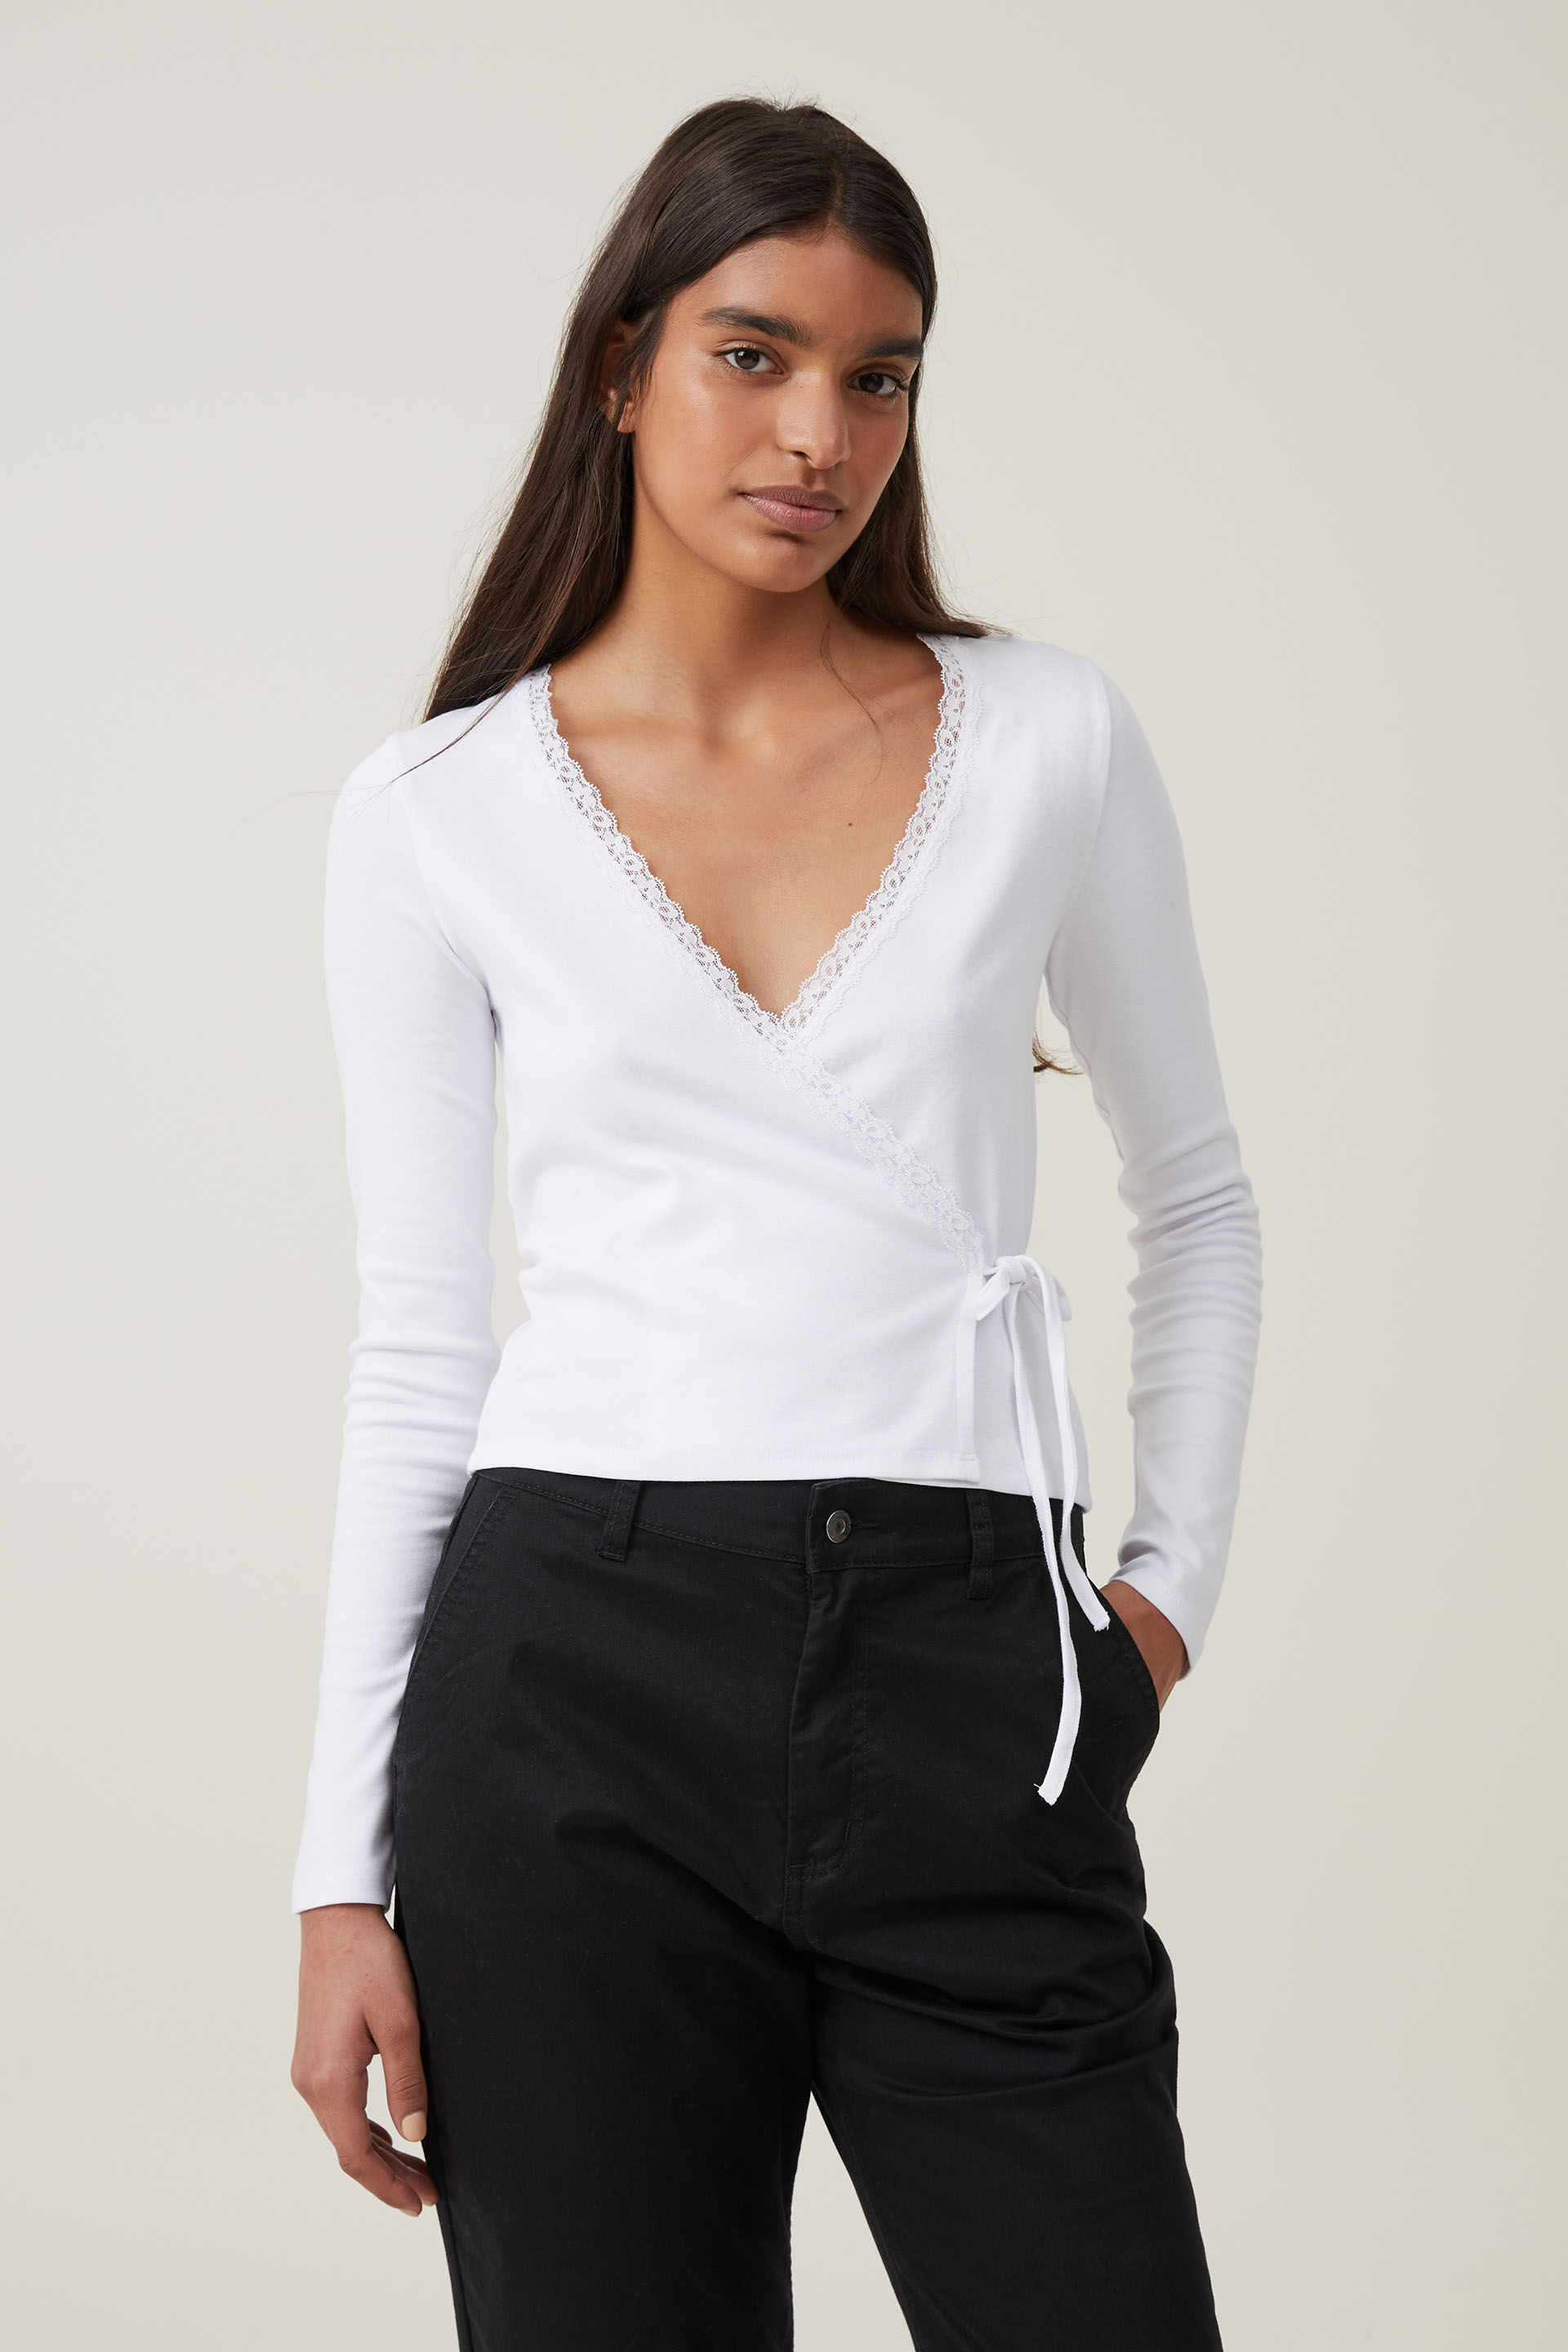 Cotton On Women - Sammie Wrap Front Long Sleeve Top - White